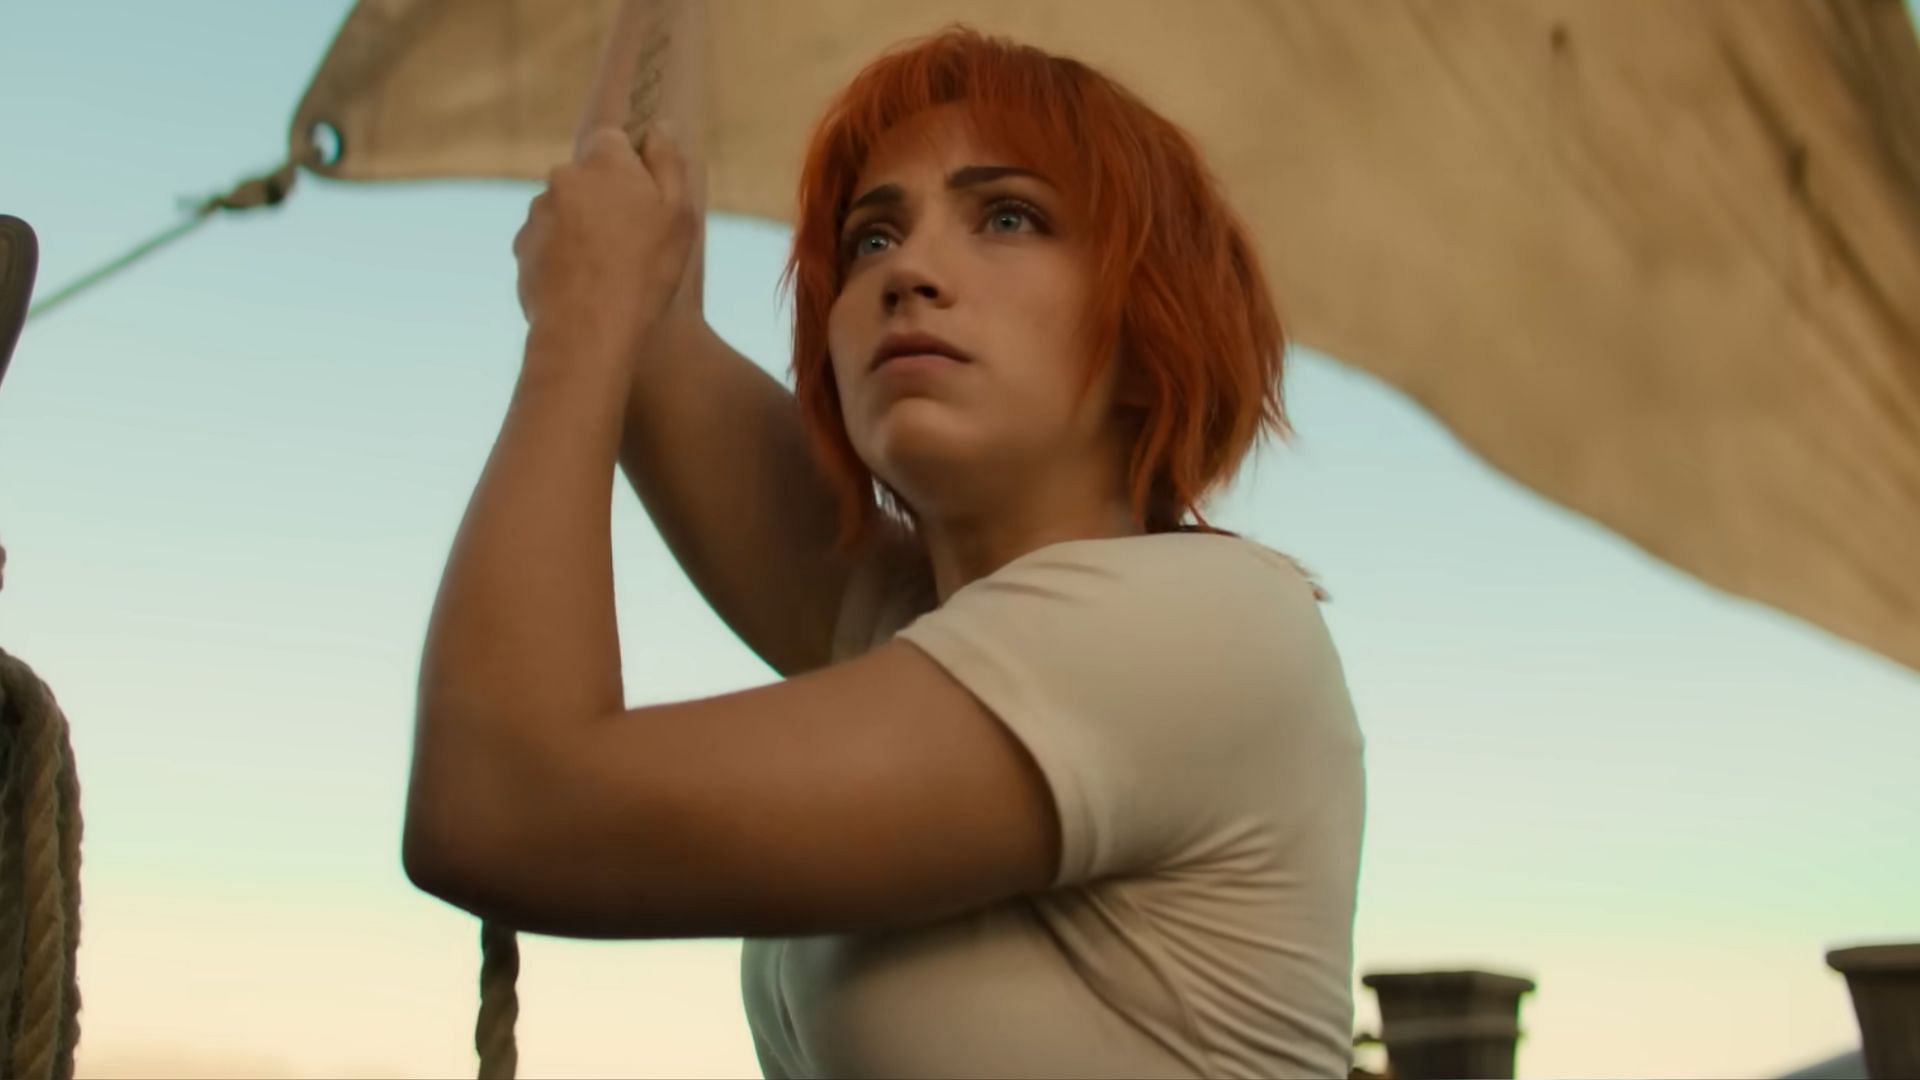 Nami as seen in One Piece Live-Action (Image via Netflix)